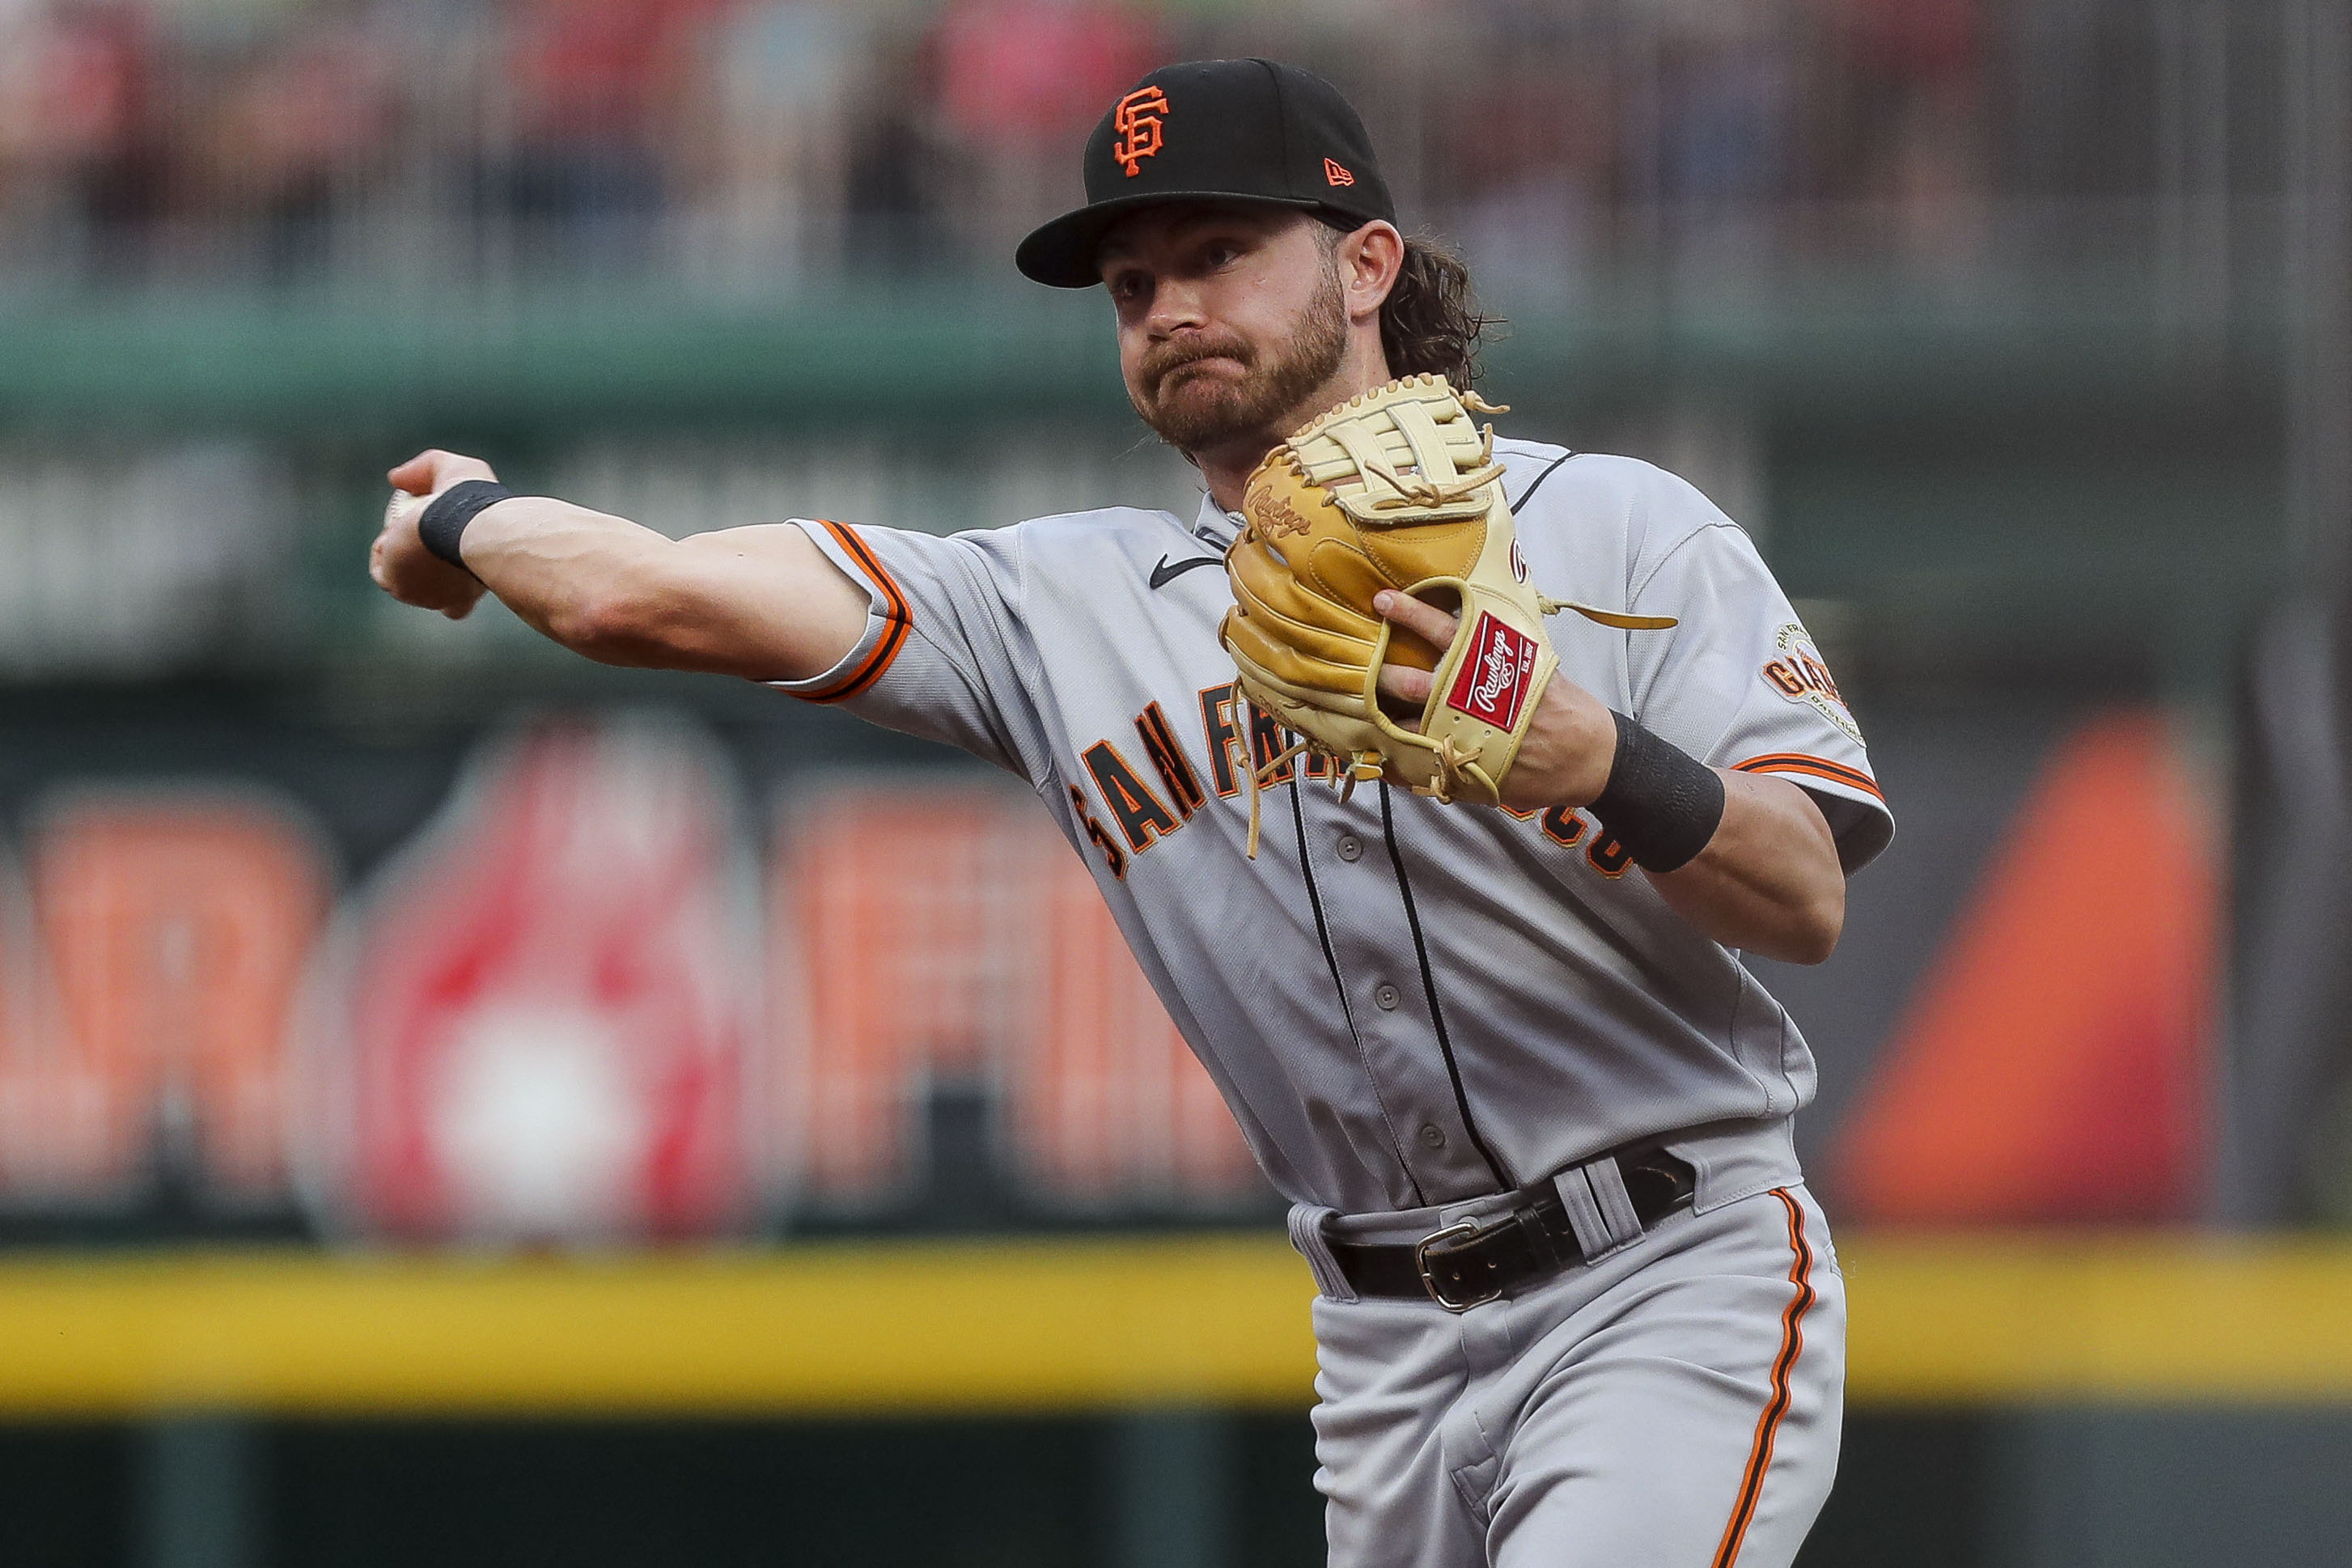 Rain forces suspension of Giants-Reds with game tied at 2